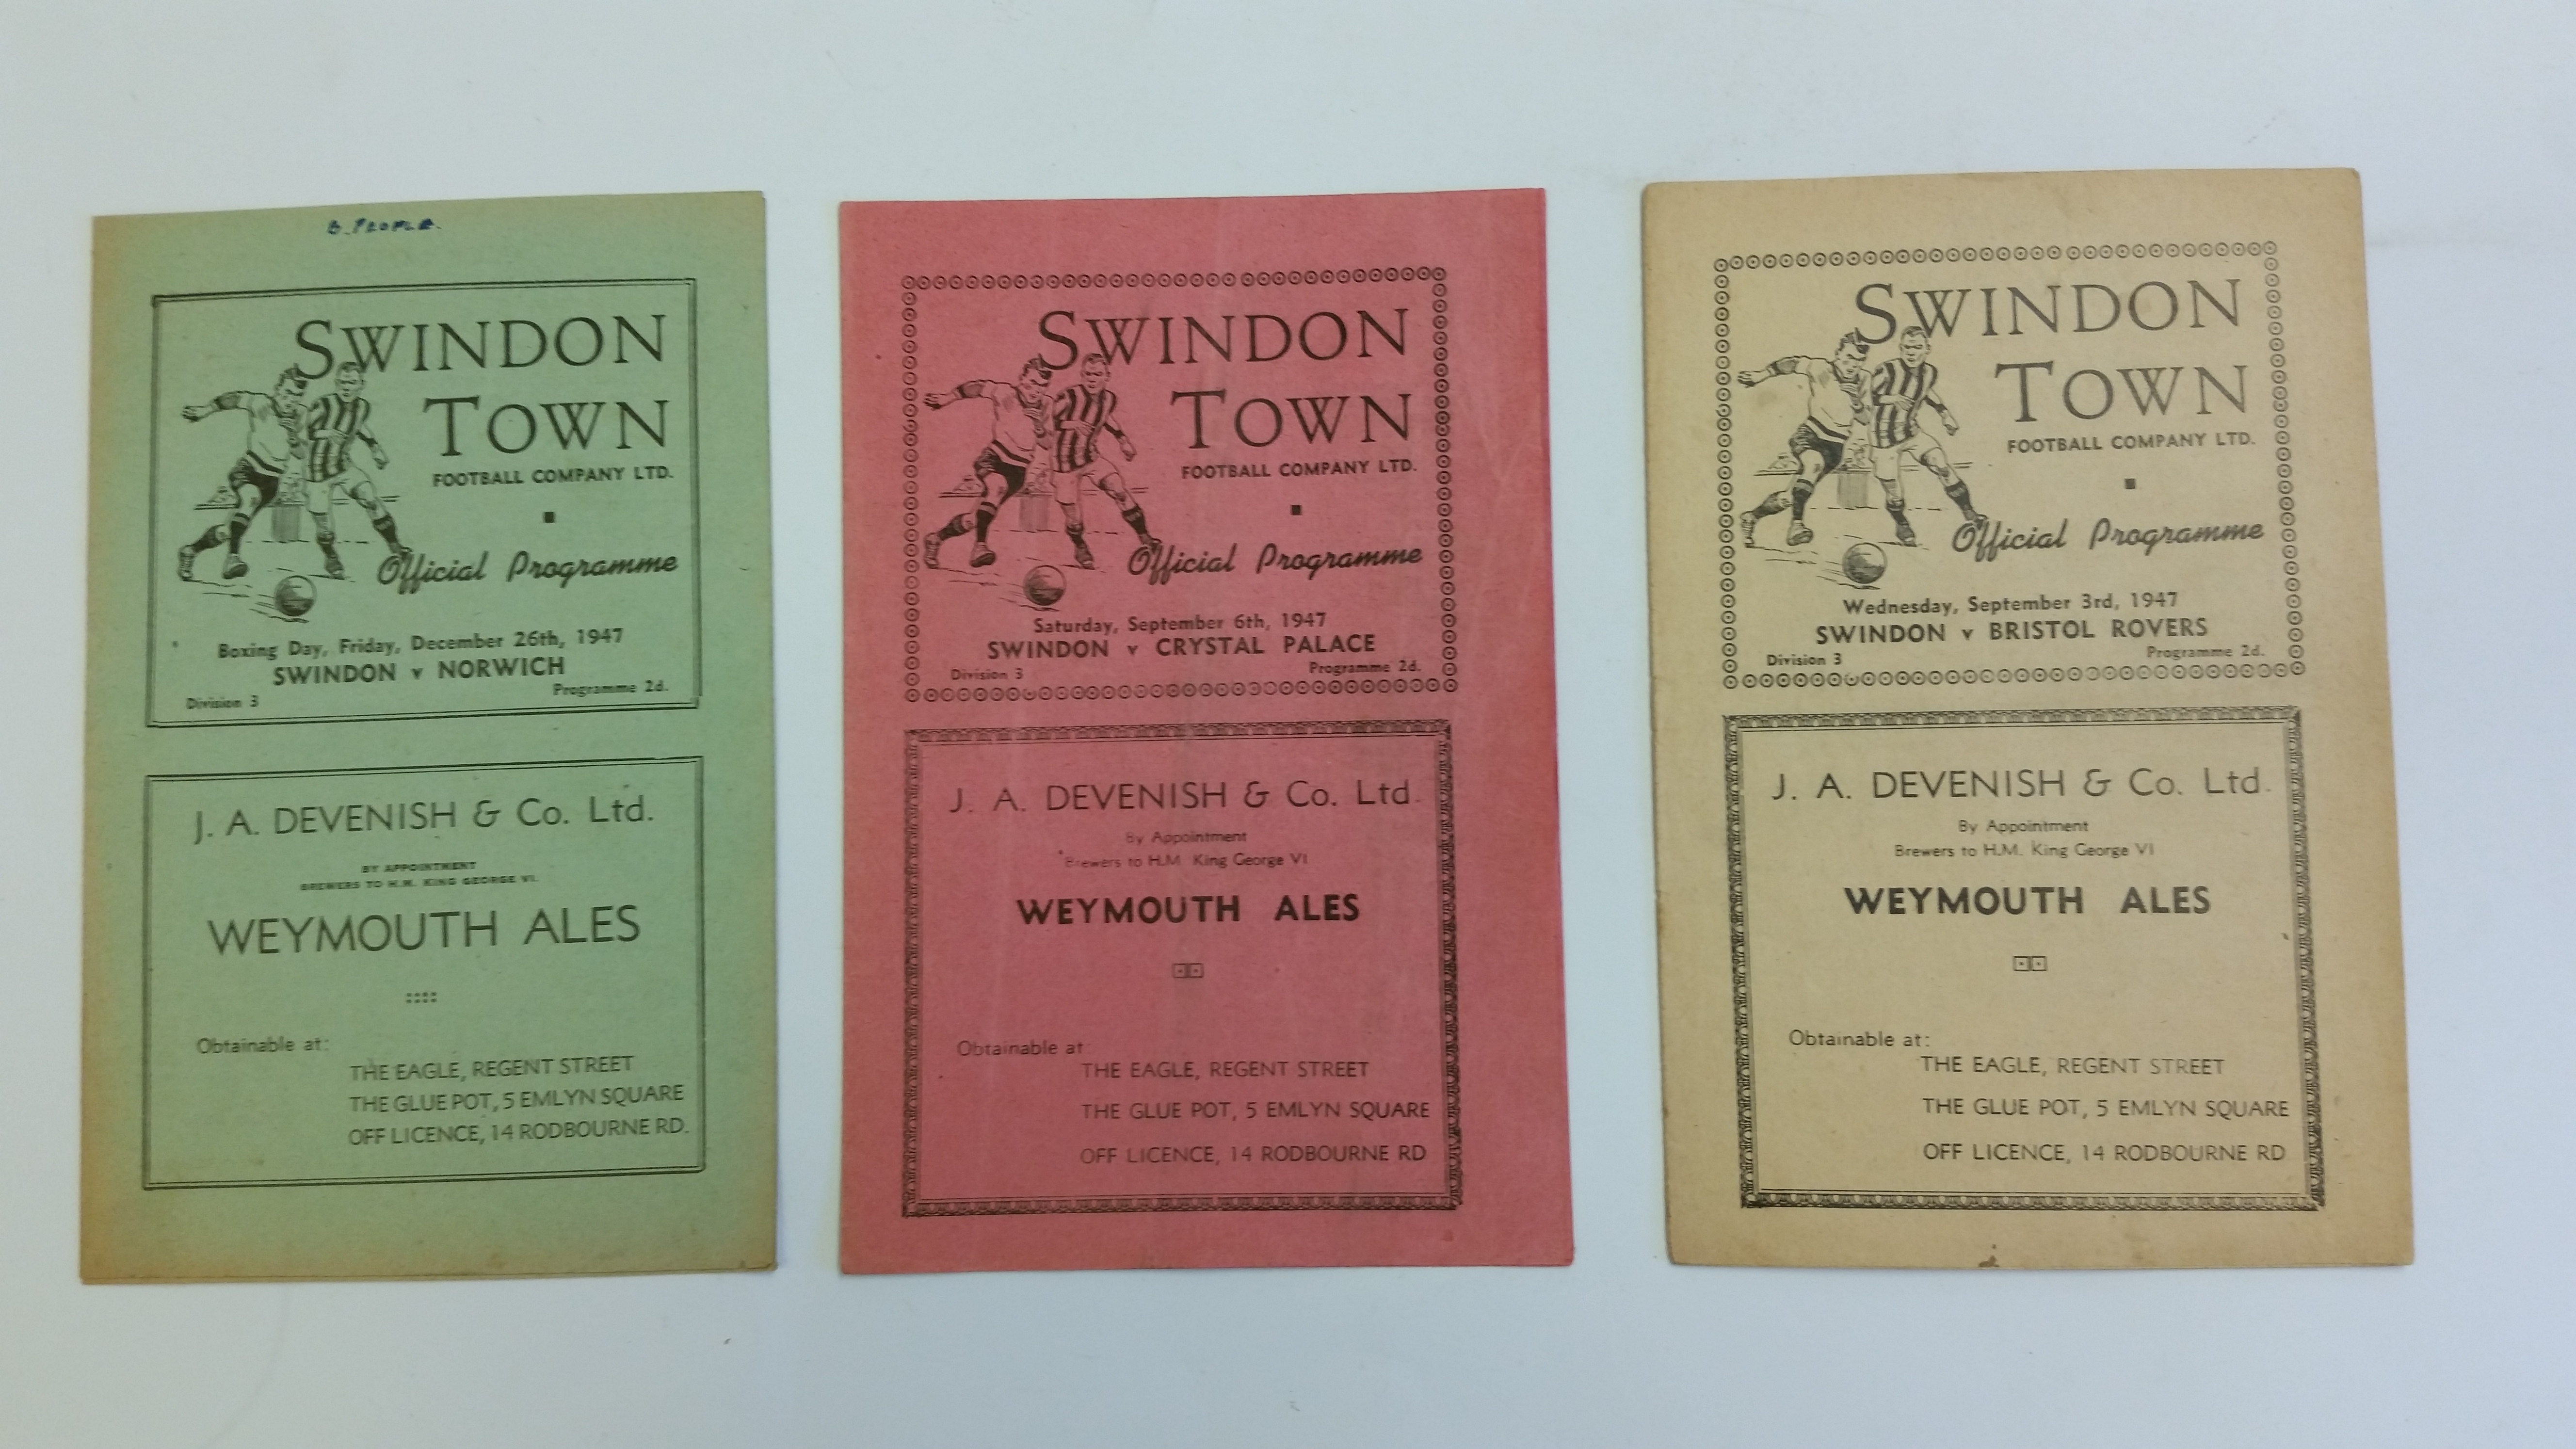 FOOTBALL, Swindon Town home programmes, 1947/48, inc. Bristol Rovers, Crystal Palace, Norwich